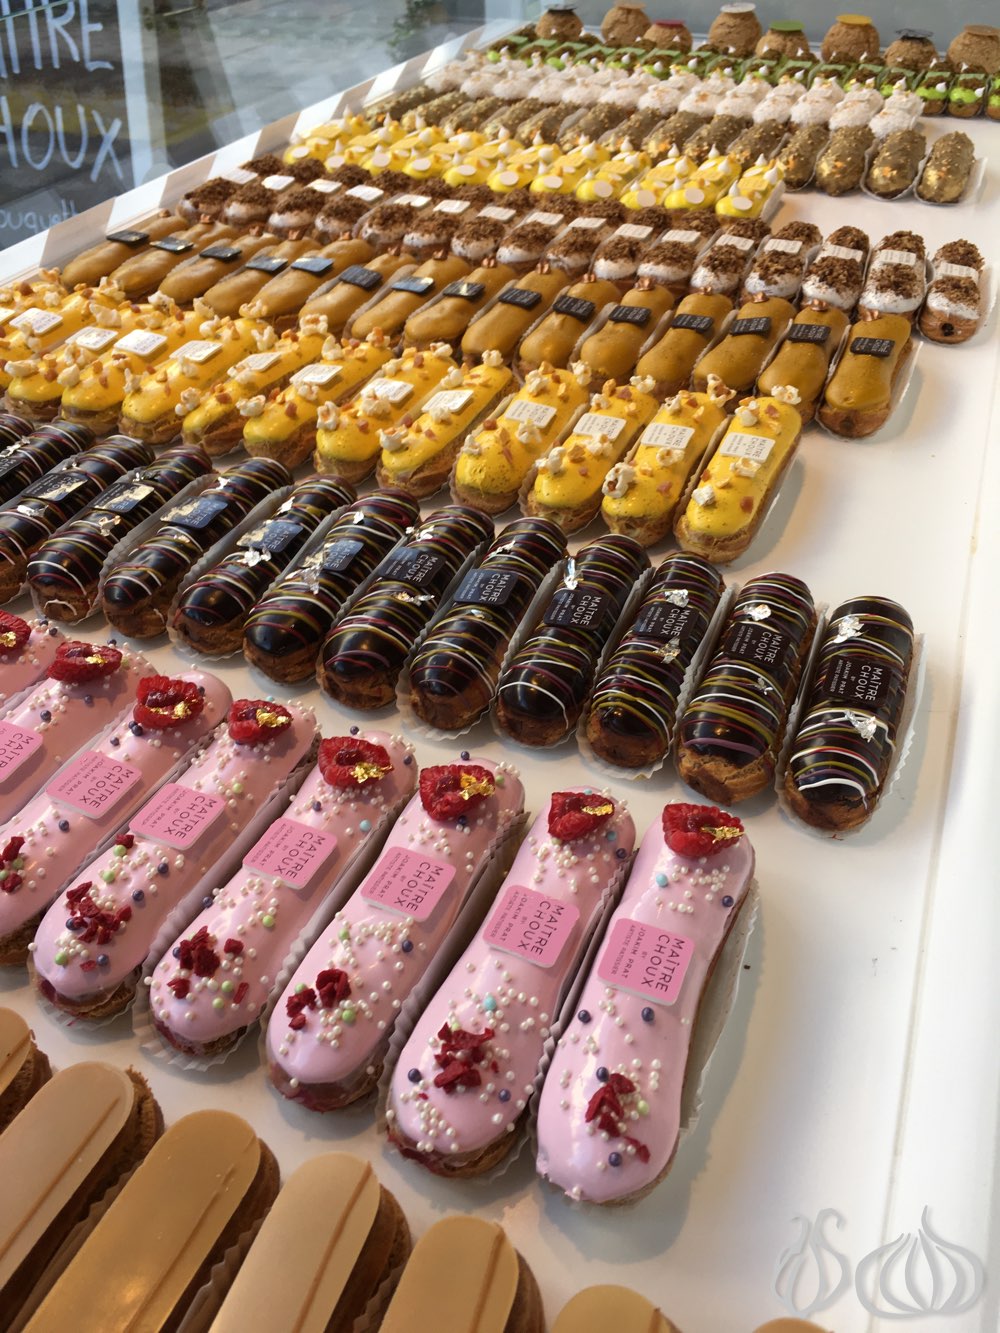 Maitre Choux Their Eclairs Are Wondrous Masterpieces Nogarlicnoonions Restaurant Food And